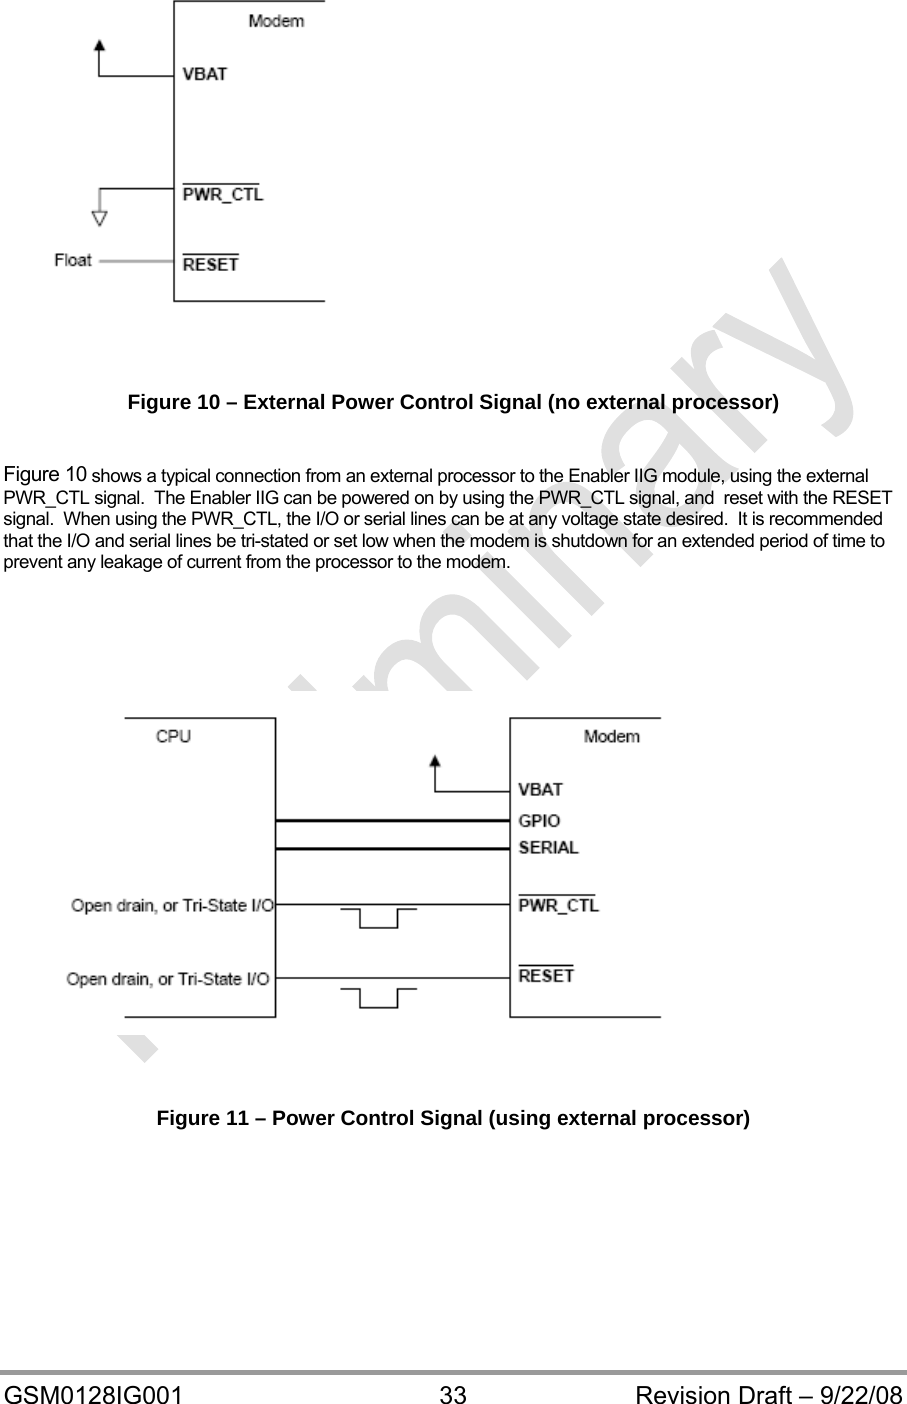  GSM0128IG001  33  Revision Draft – 9/22/08    Figure 10 – External Power Control Signal (no external processor)  Figure 10 shows a typical connection from an external processor to the Enabler IIG module, using the external PWR_CTL signal.  The Enabler IIG can be powered on by using the PWR_CTL signal, and  reset with the RESET signal.  When using the PWR_CTL, the I/O or serial lines can be at any voltage state desired.  It is recommended that the I/O and serial lines be tri-stated or set low when the modem is shutdown for an extended period of time to prevent any leakage of current from the processor to the modem.     Figure 11 – Power Control Signal (using external processor)  